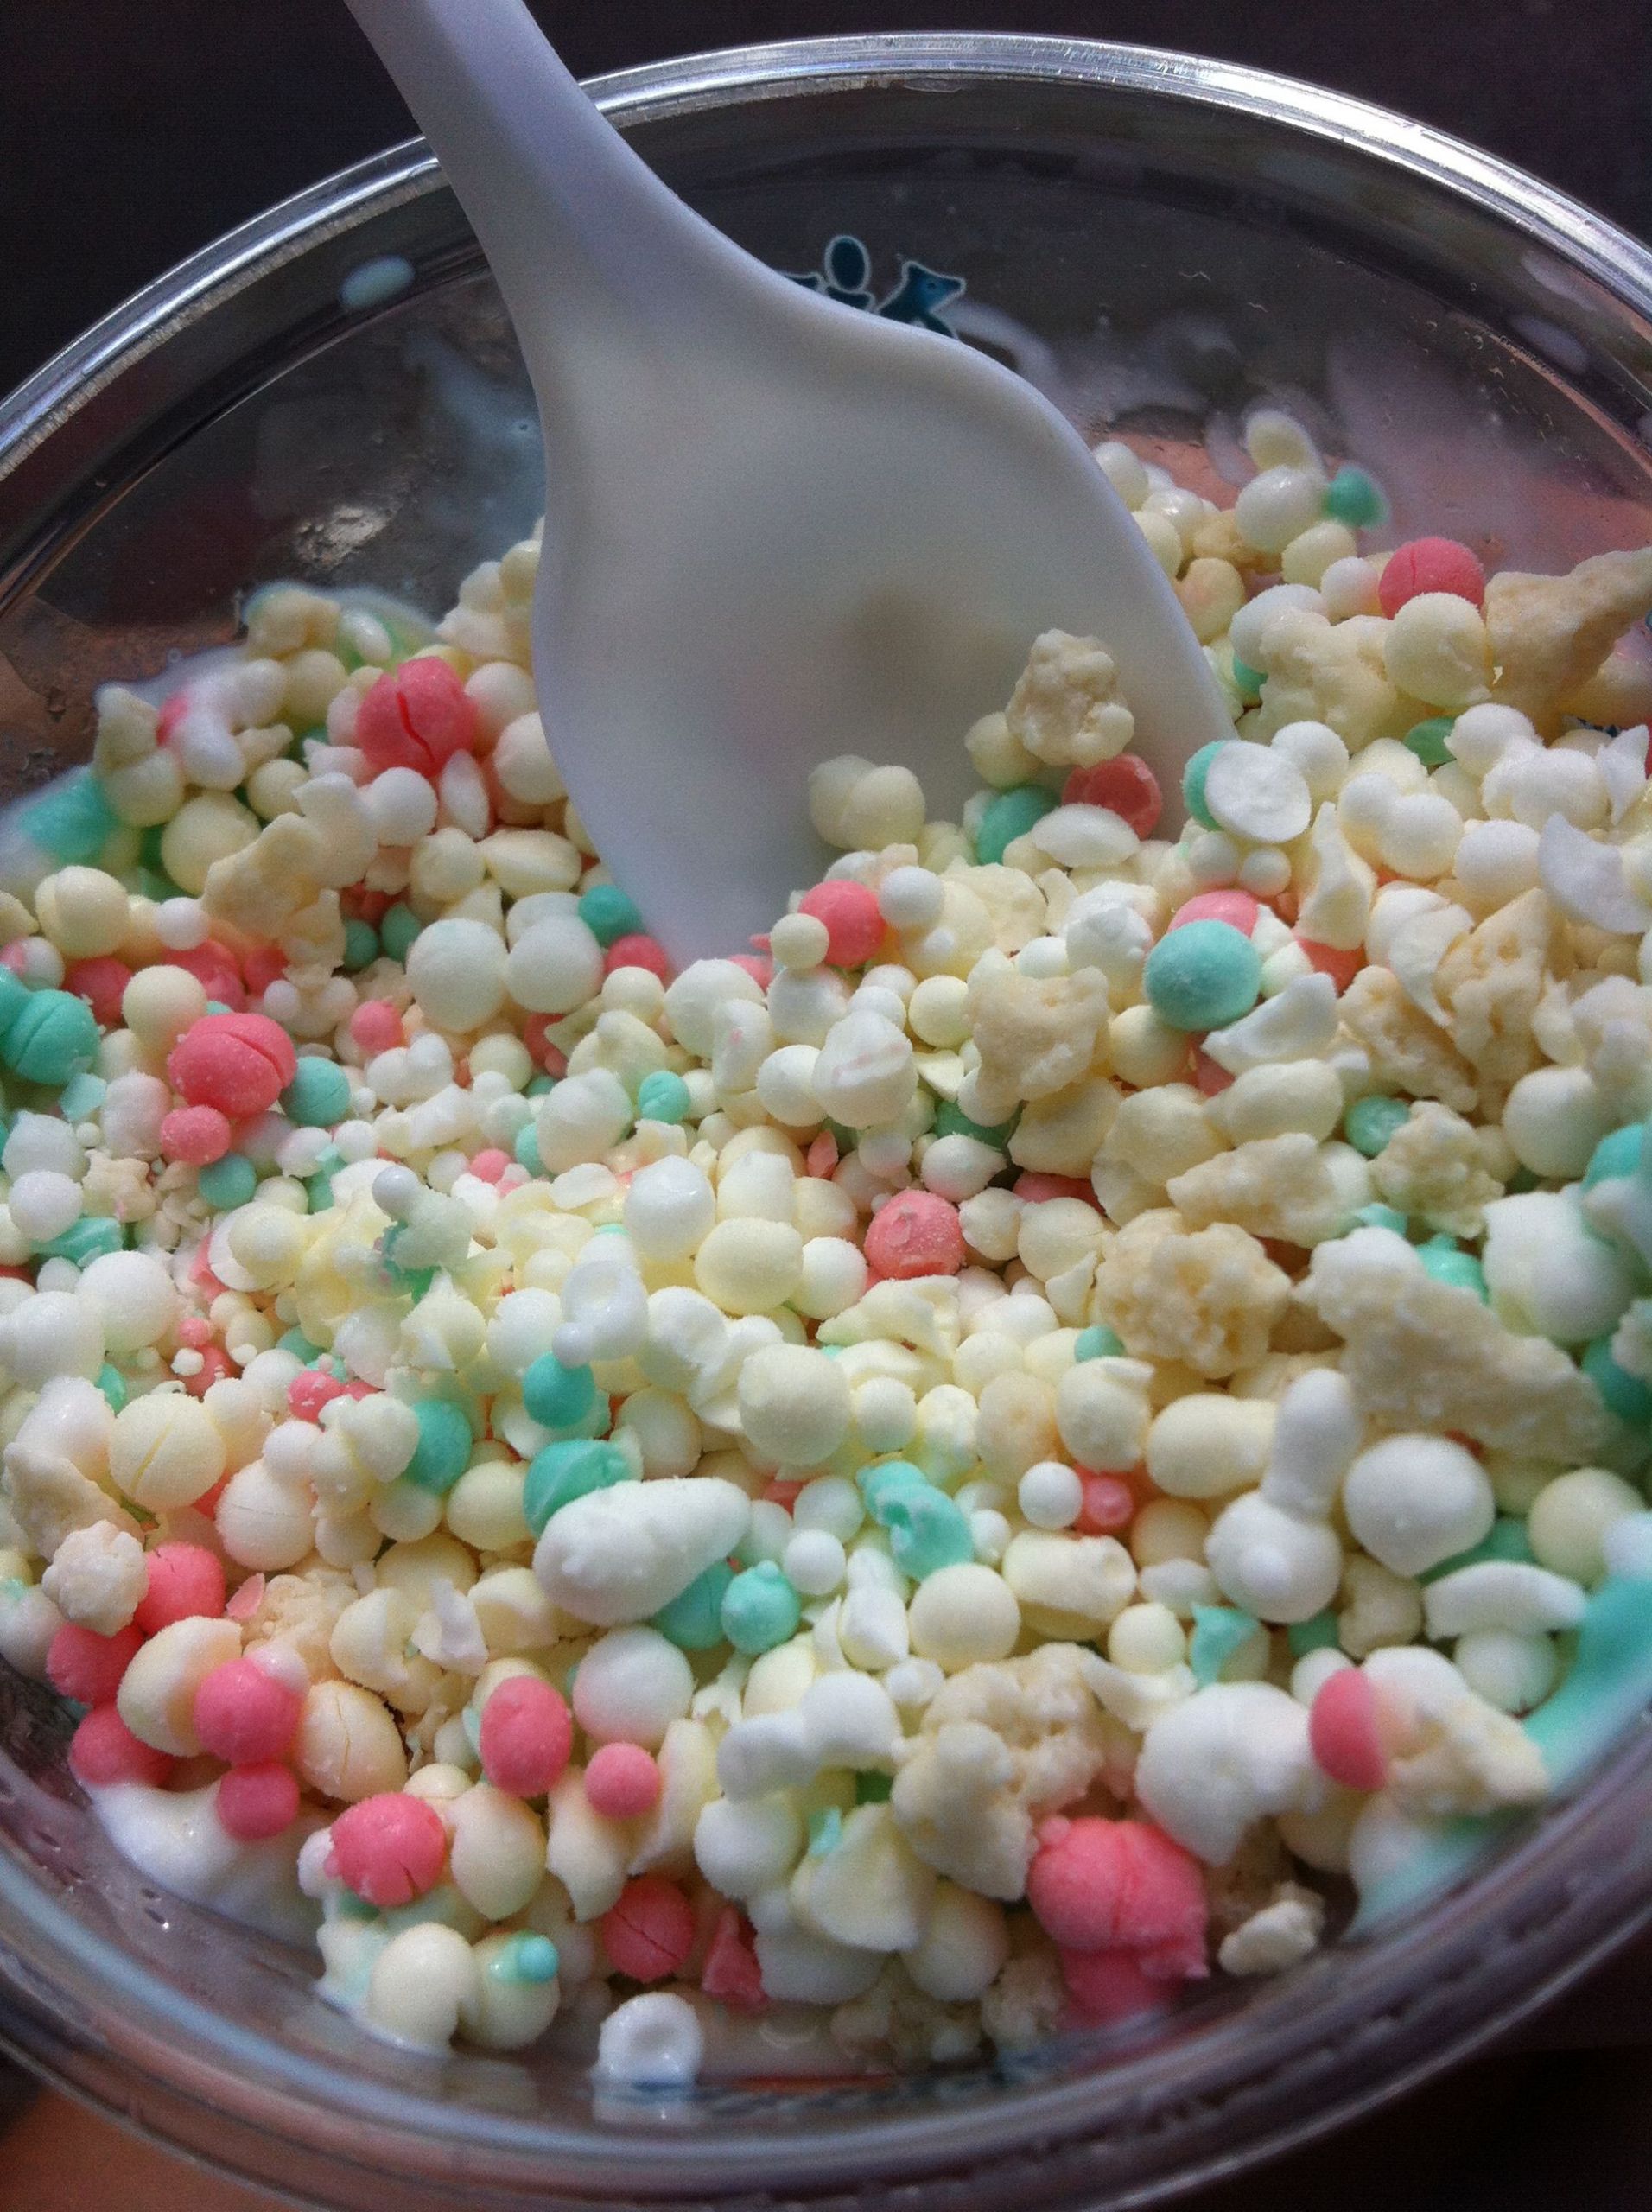 Birthday Cake Dippin Dots
 Birthday Cake Dip n Dots I want this right now D